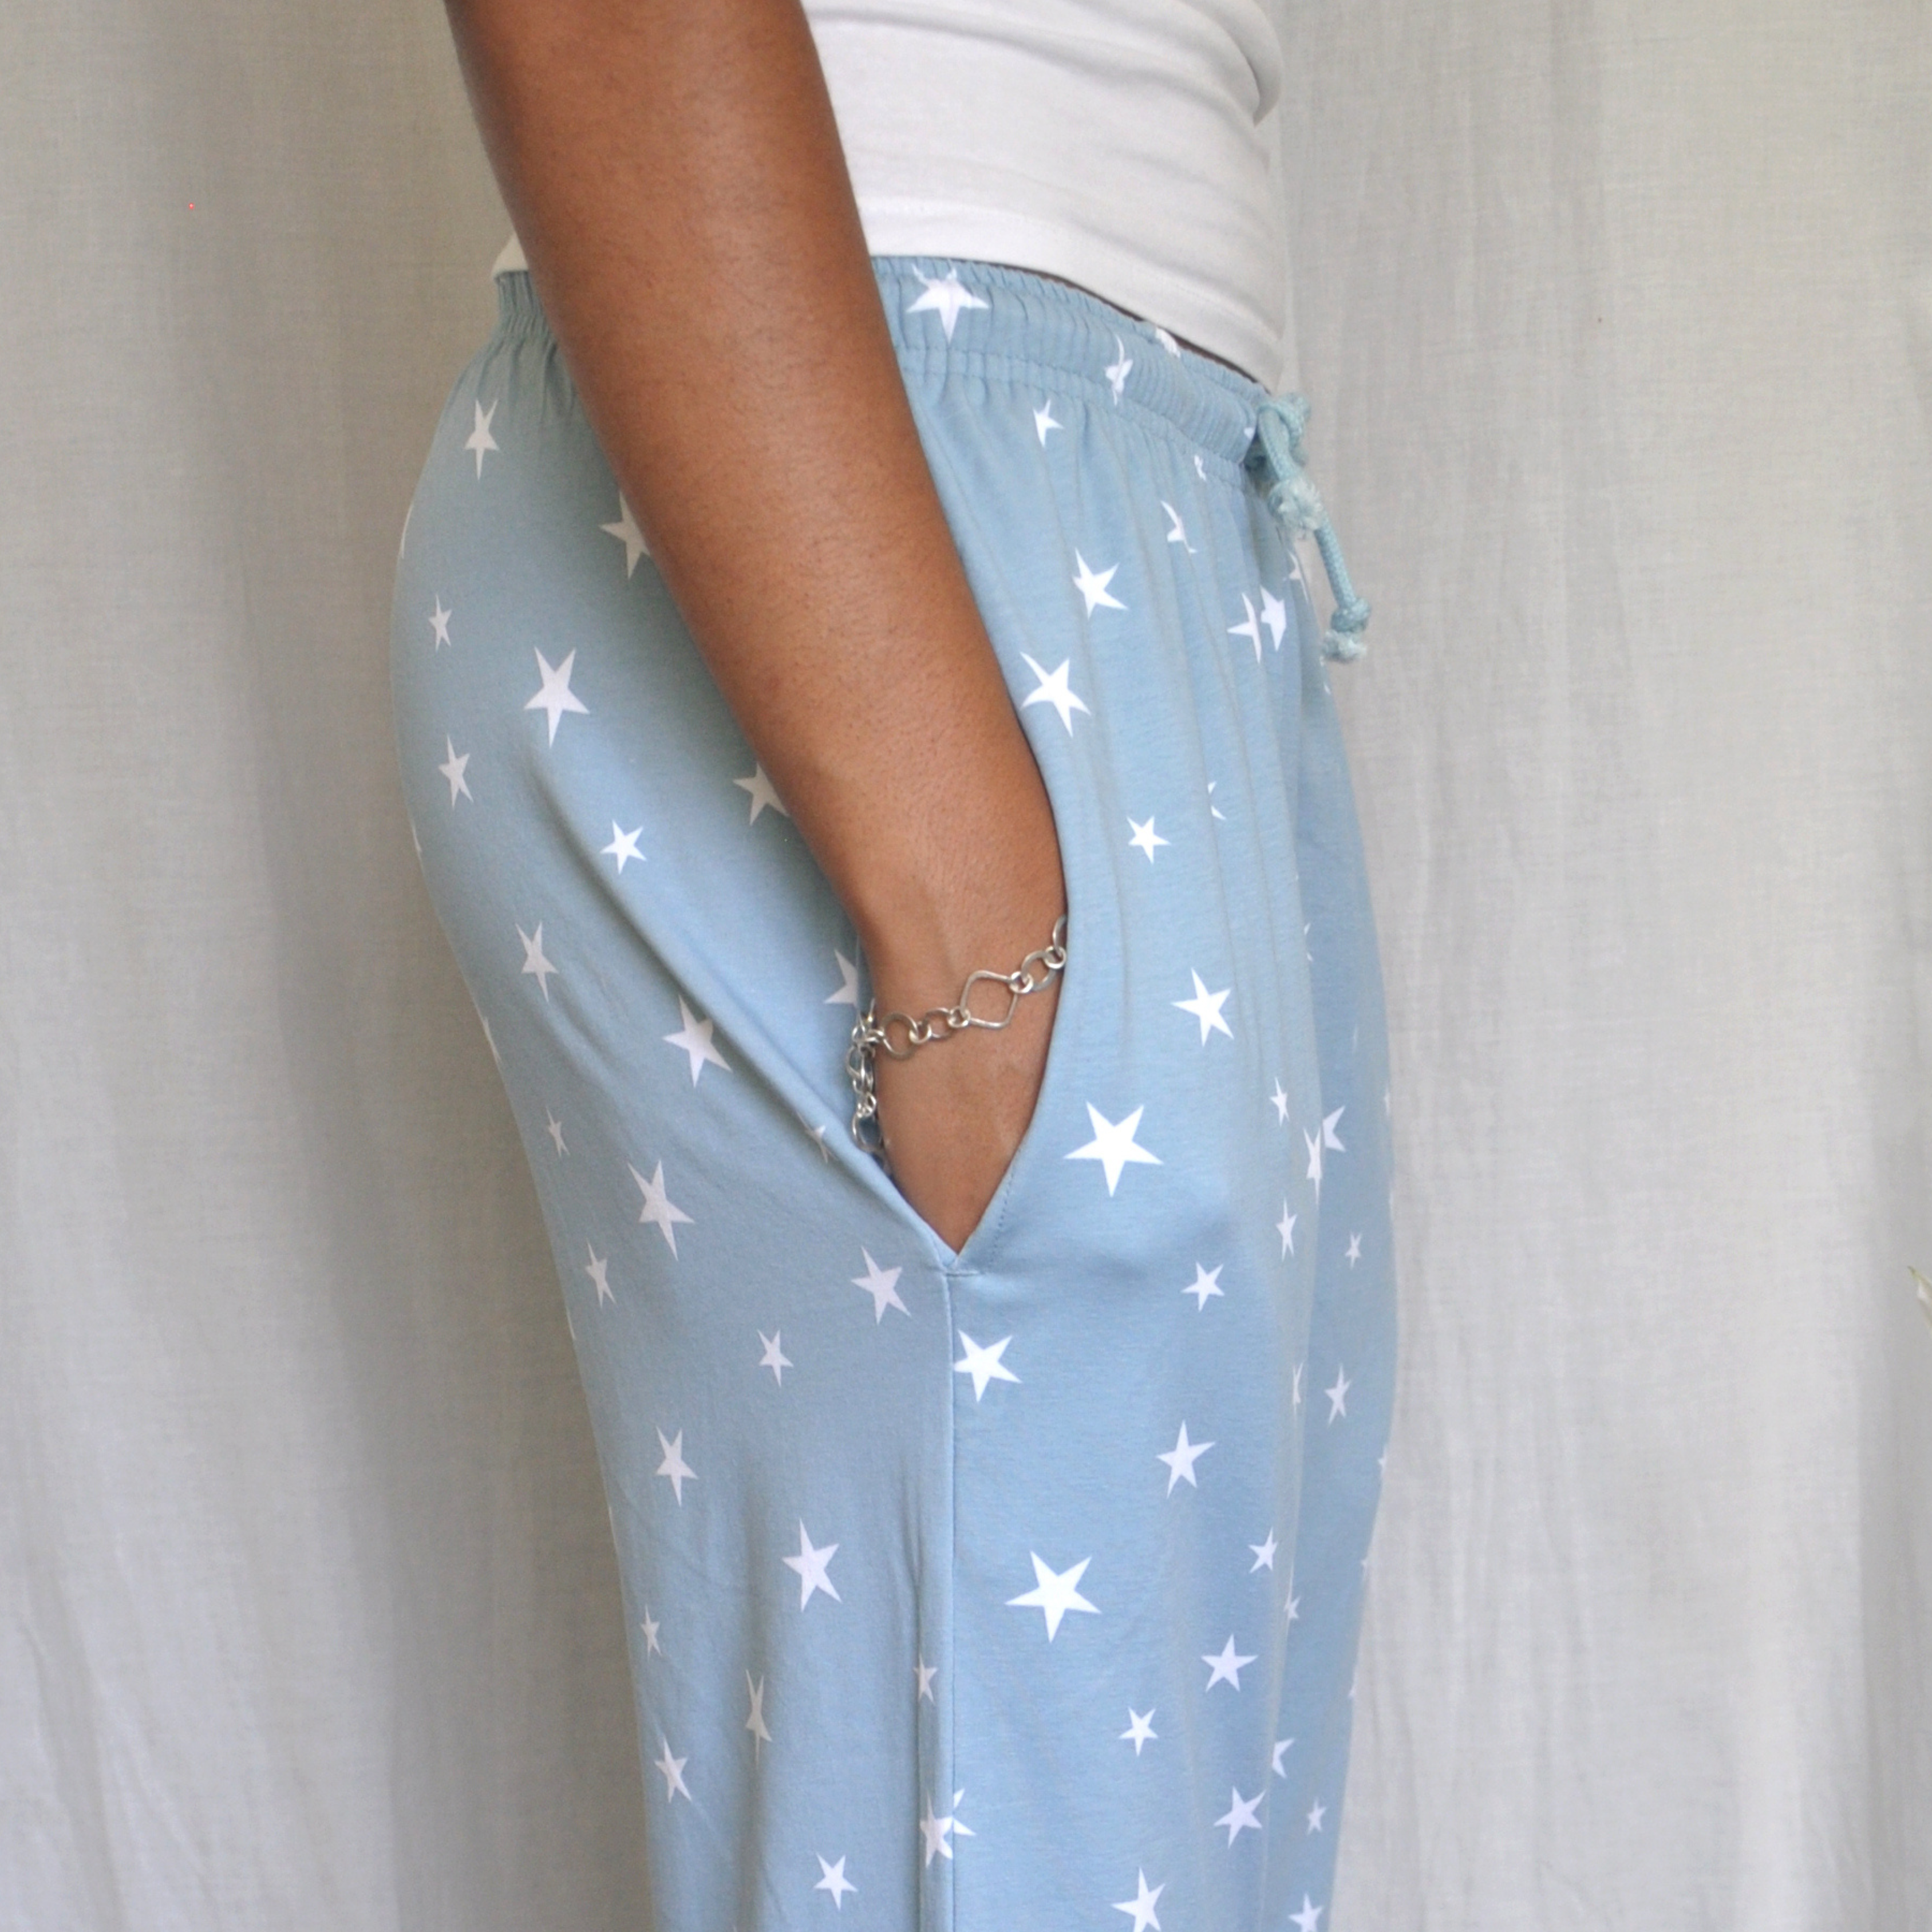 A person is shown from the side wearing light blue pajama pants with white star patterns. They have their hand in the pocket of the pyjama bottoms, which have a drawstring waist. The person is also wearing a white shirt and a silver bracelet. The background is white fabric.